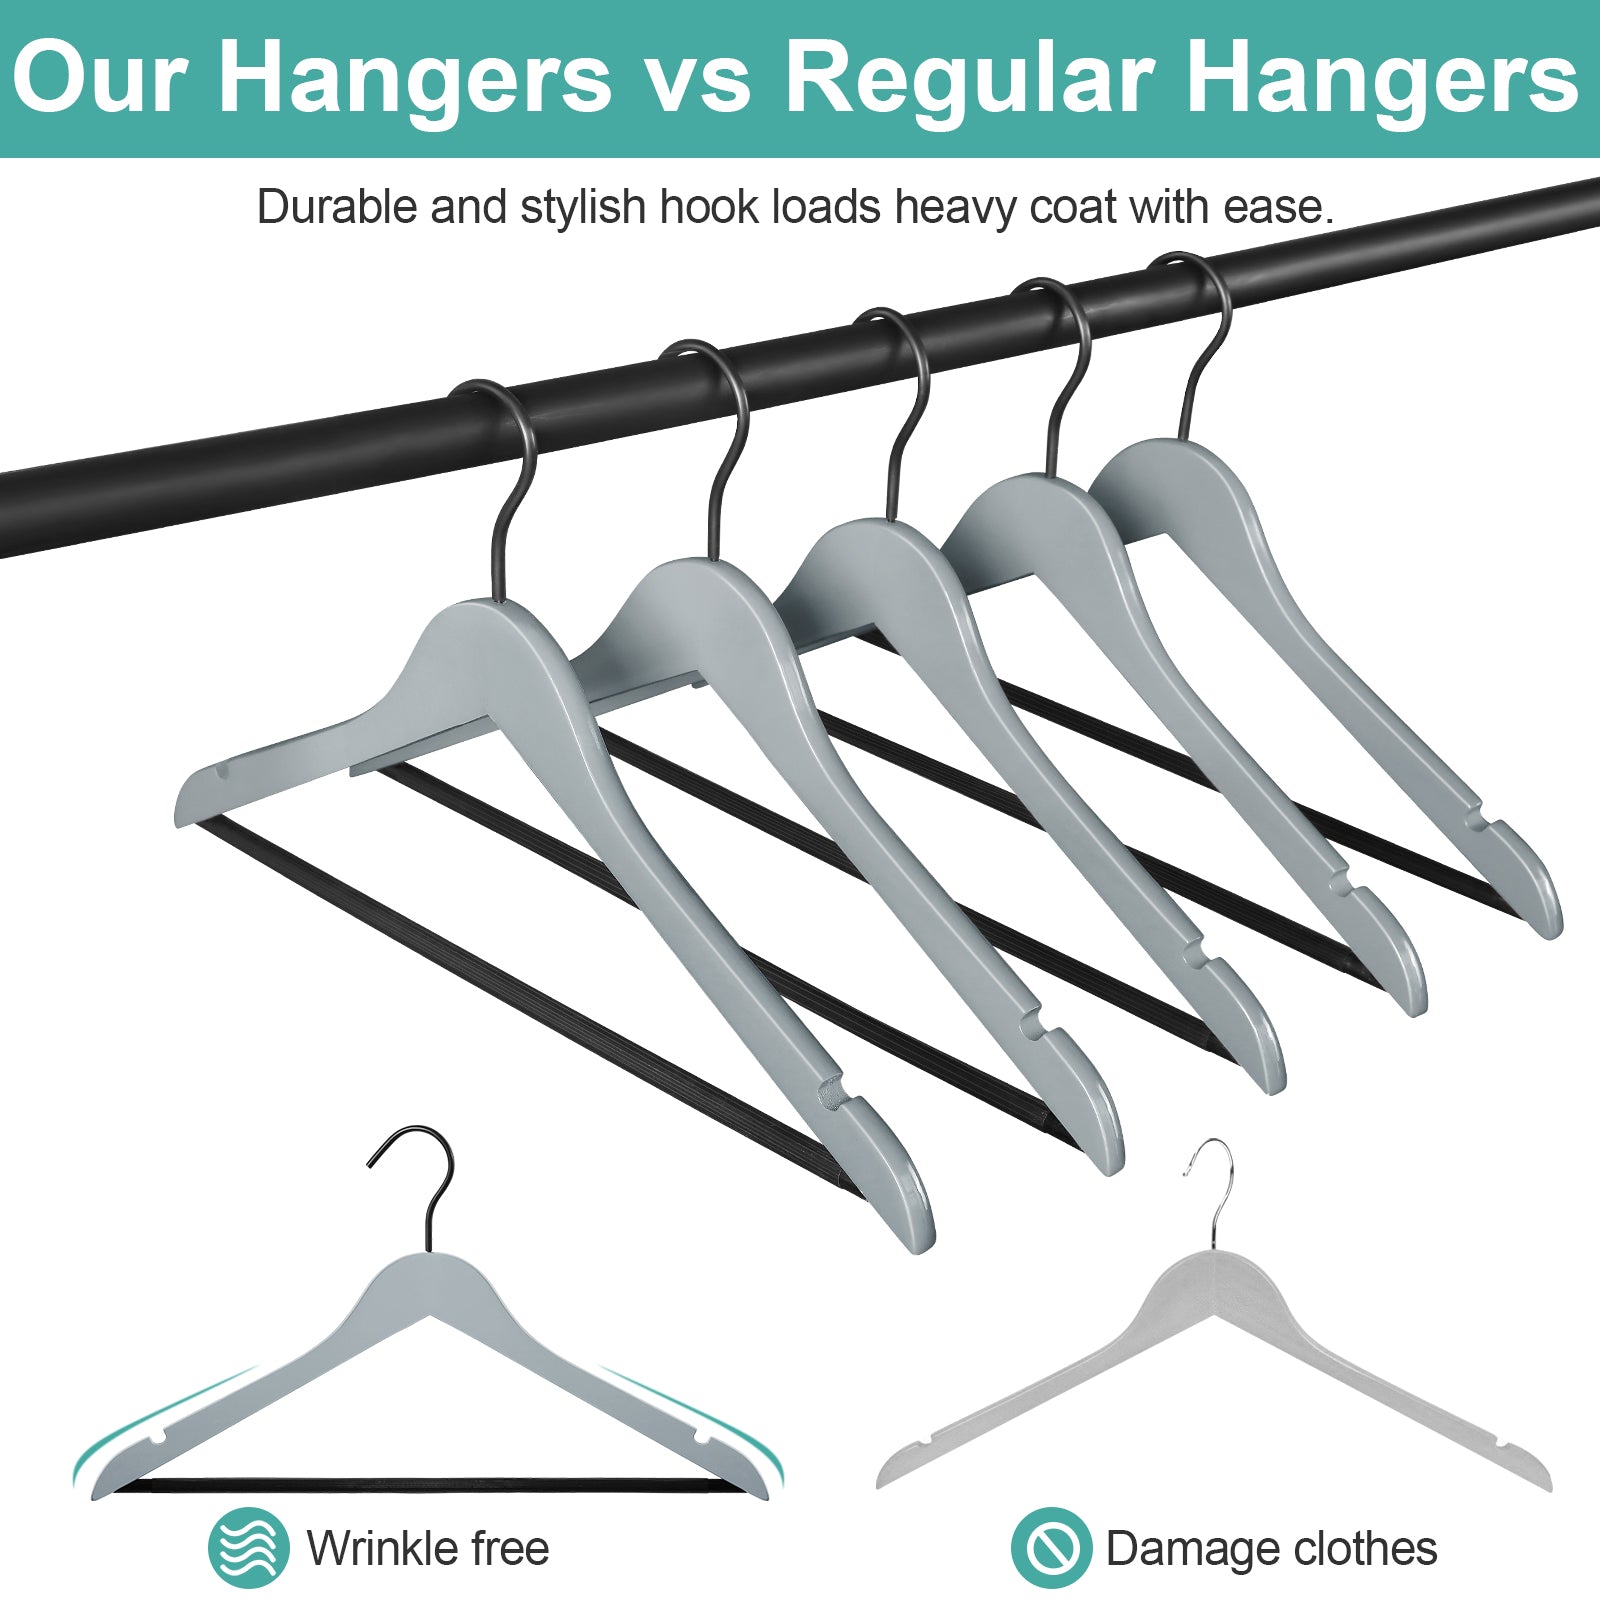 Premium Wooden Hangers 20 Pack - Durable Non Slip Coat Hangers Heavy Duty-  Natural Solid Wood Hangers - Clothes Hangers With Chrome Swivel Hooks 